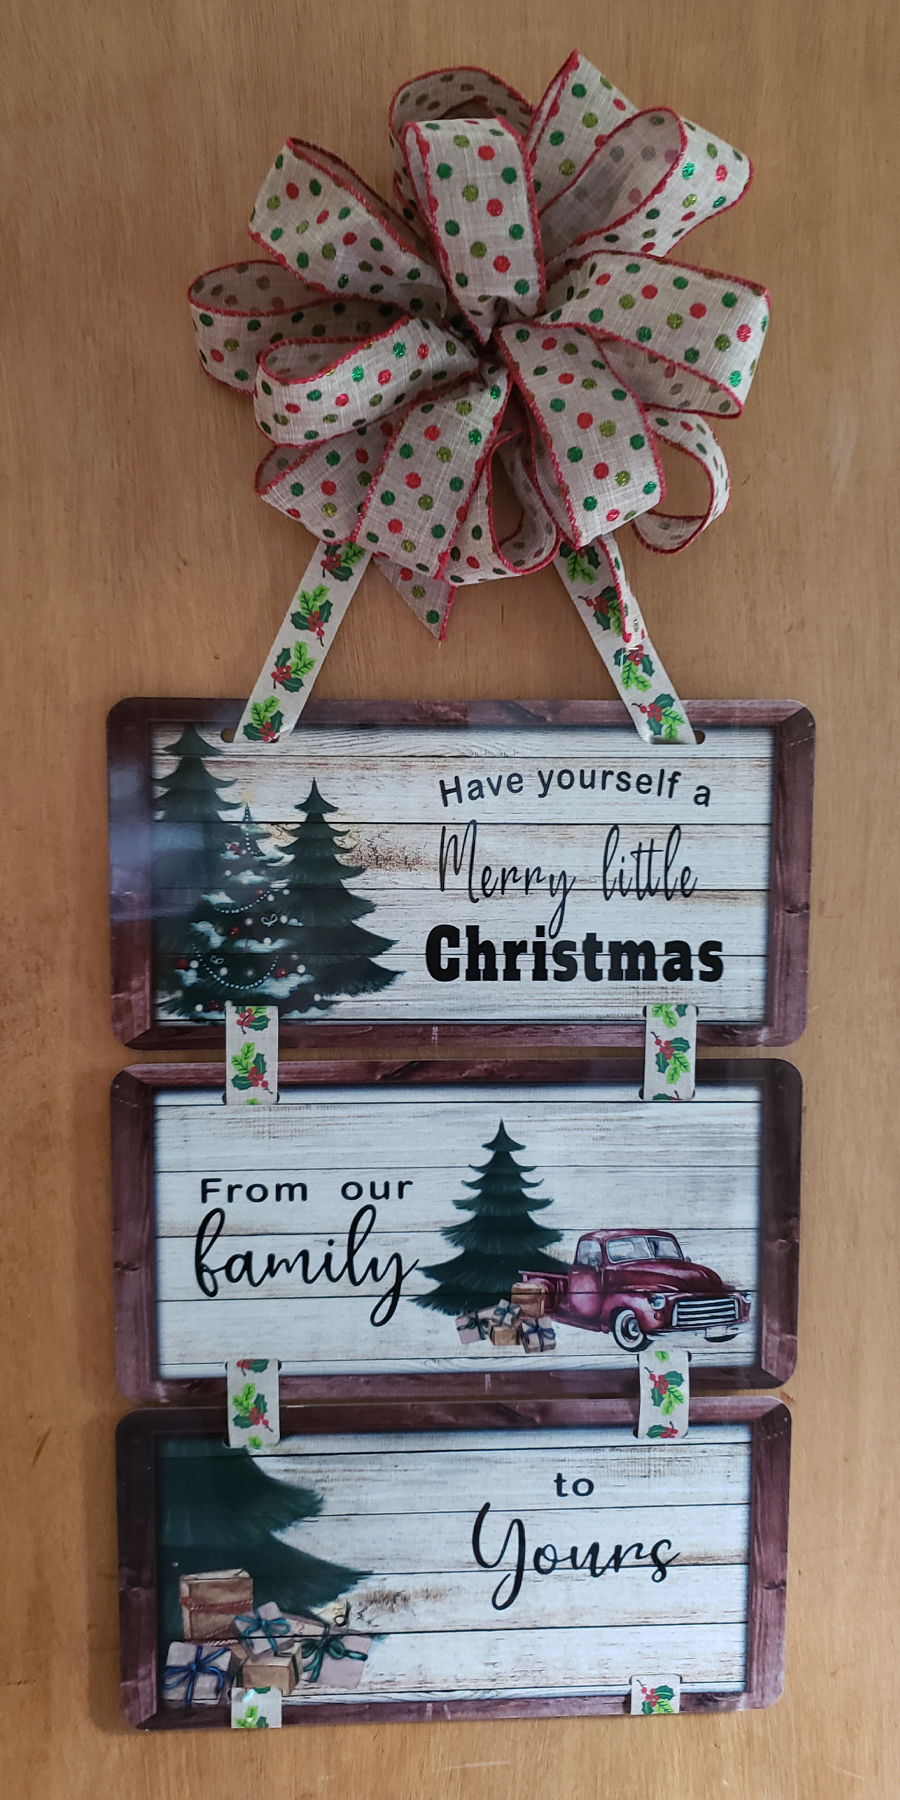 These beautiful door hangers were made with Conde's license plates. They sub beautifully.  Can'